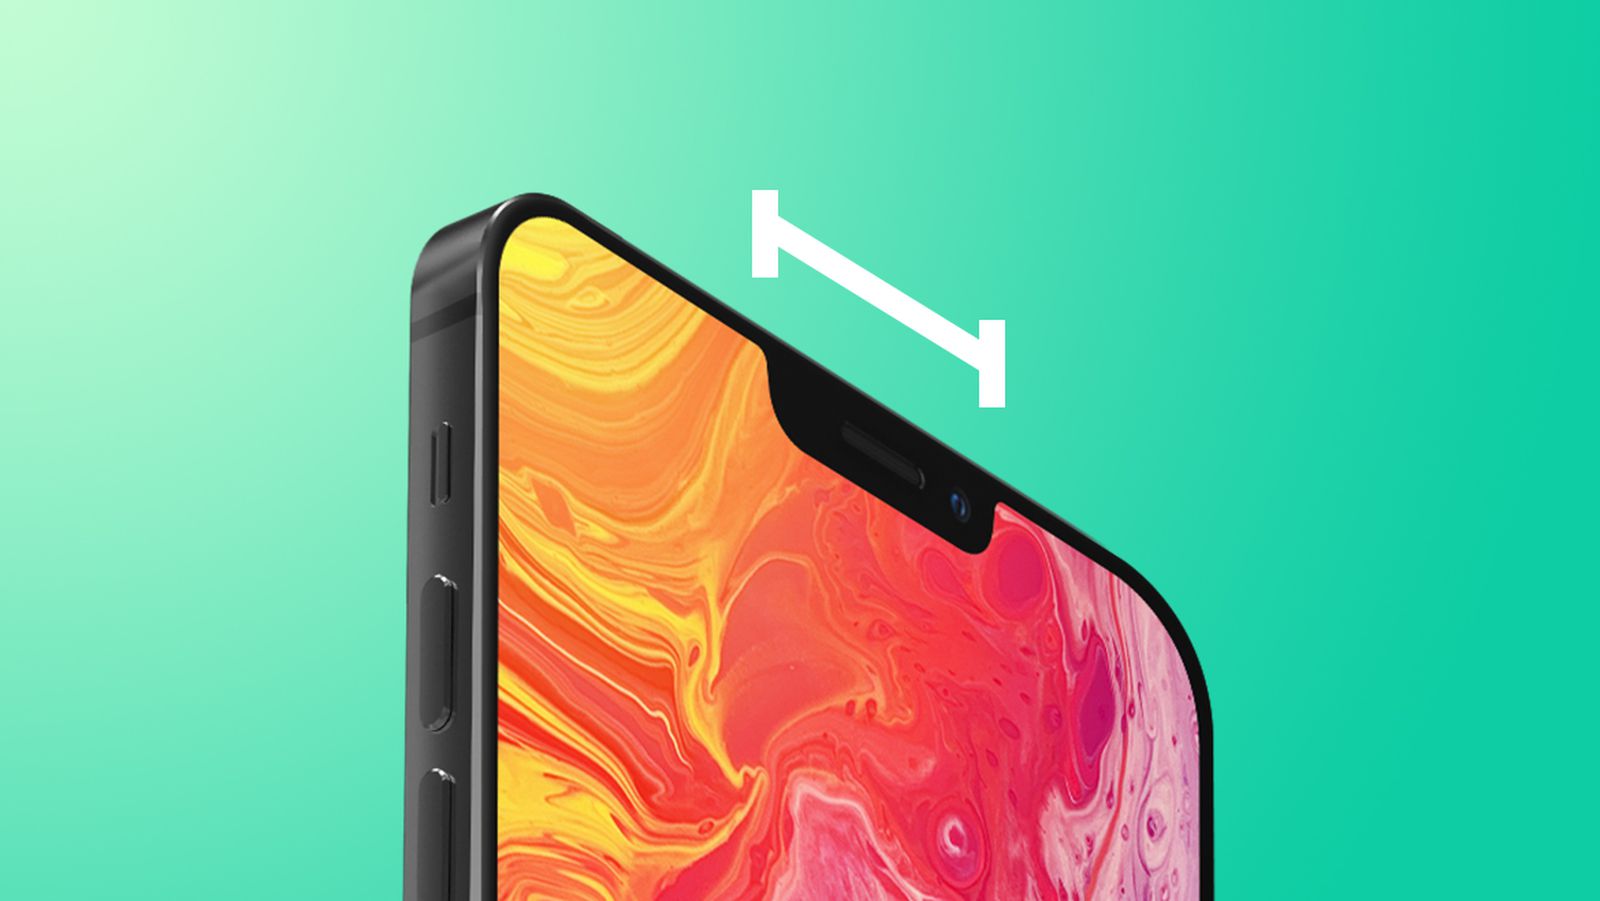 IPhone 13 rumors recap: smaller notch, bigger batteries, 120Hz for professional models, enhanced 5G, Wi-Fi 6E and more